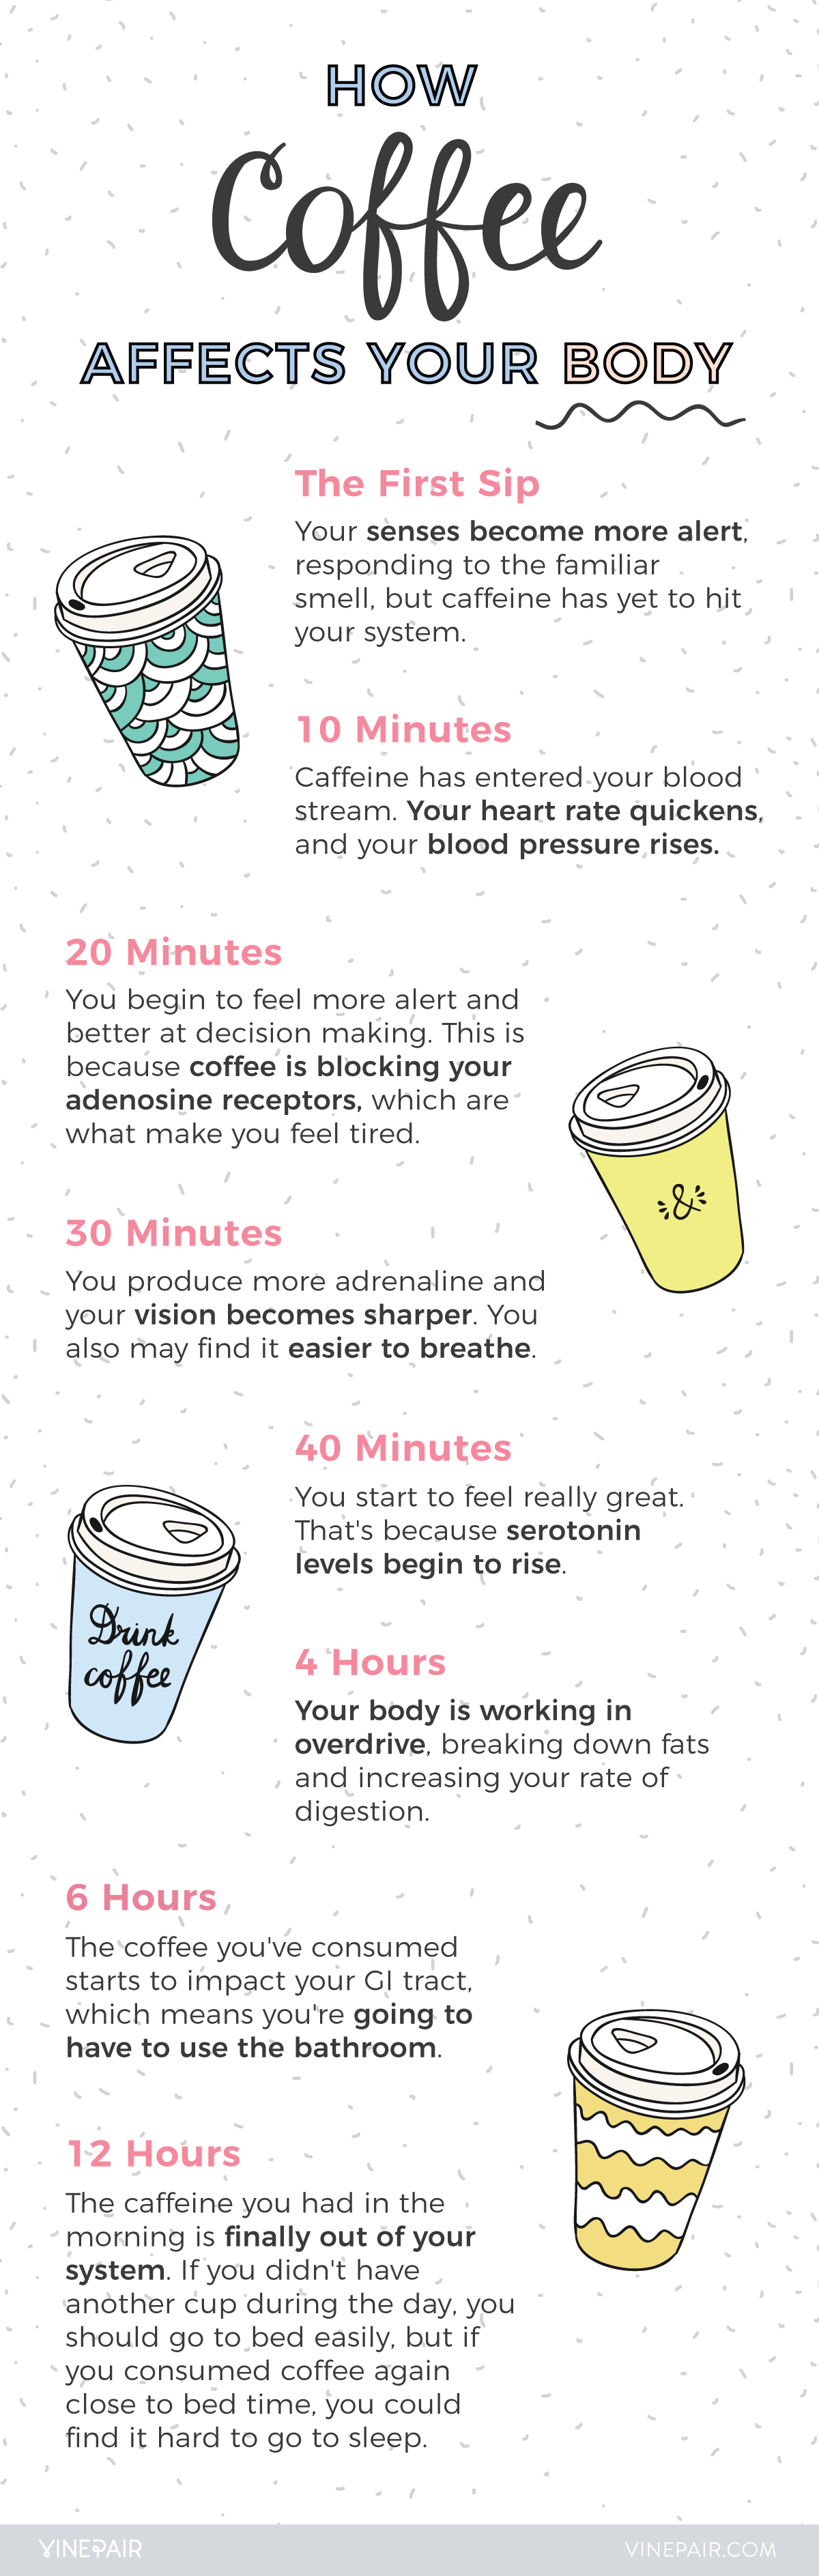 What Happens to Your Body When You Drink Coffee?